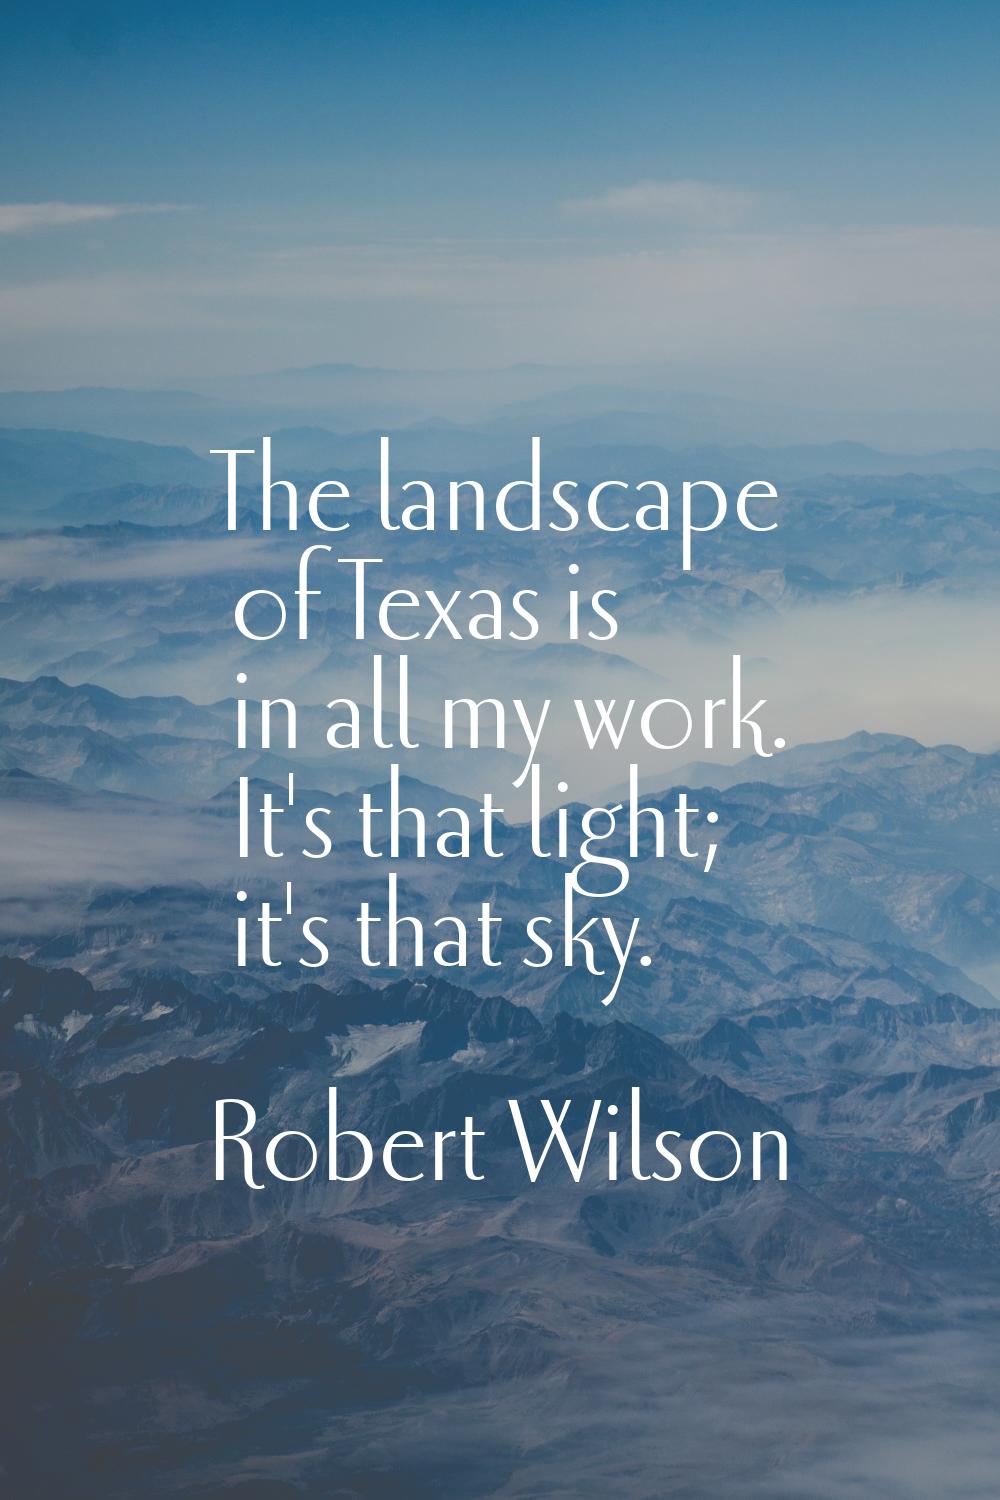 The landscape of Texas is in all my work. It's that light; it's that sky.